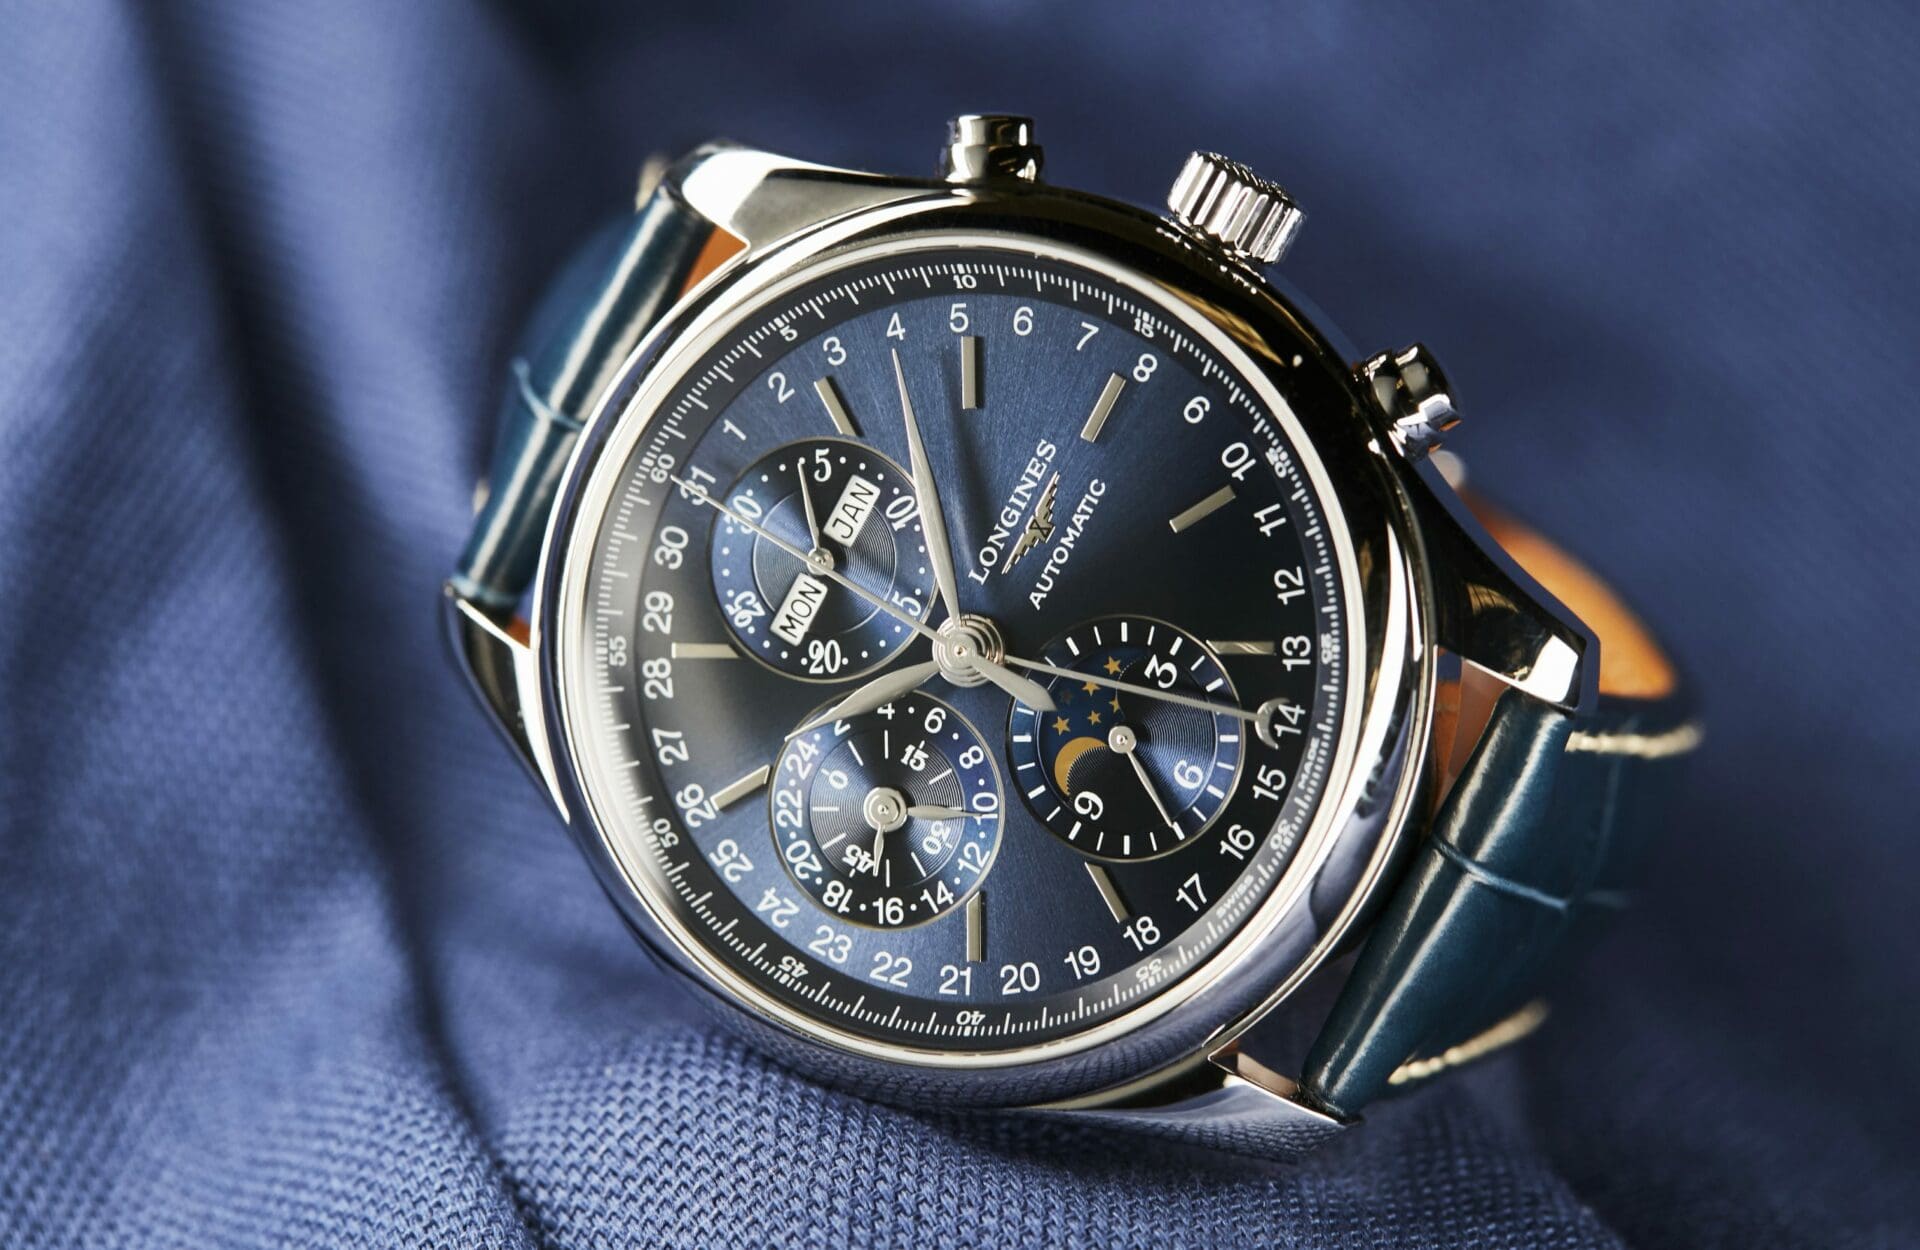 HANDS-ON: The Longines Master Collection Ref. L2.673.4.92.0